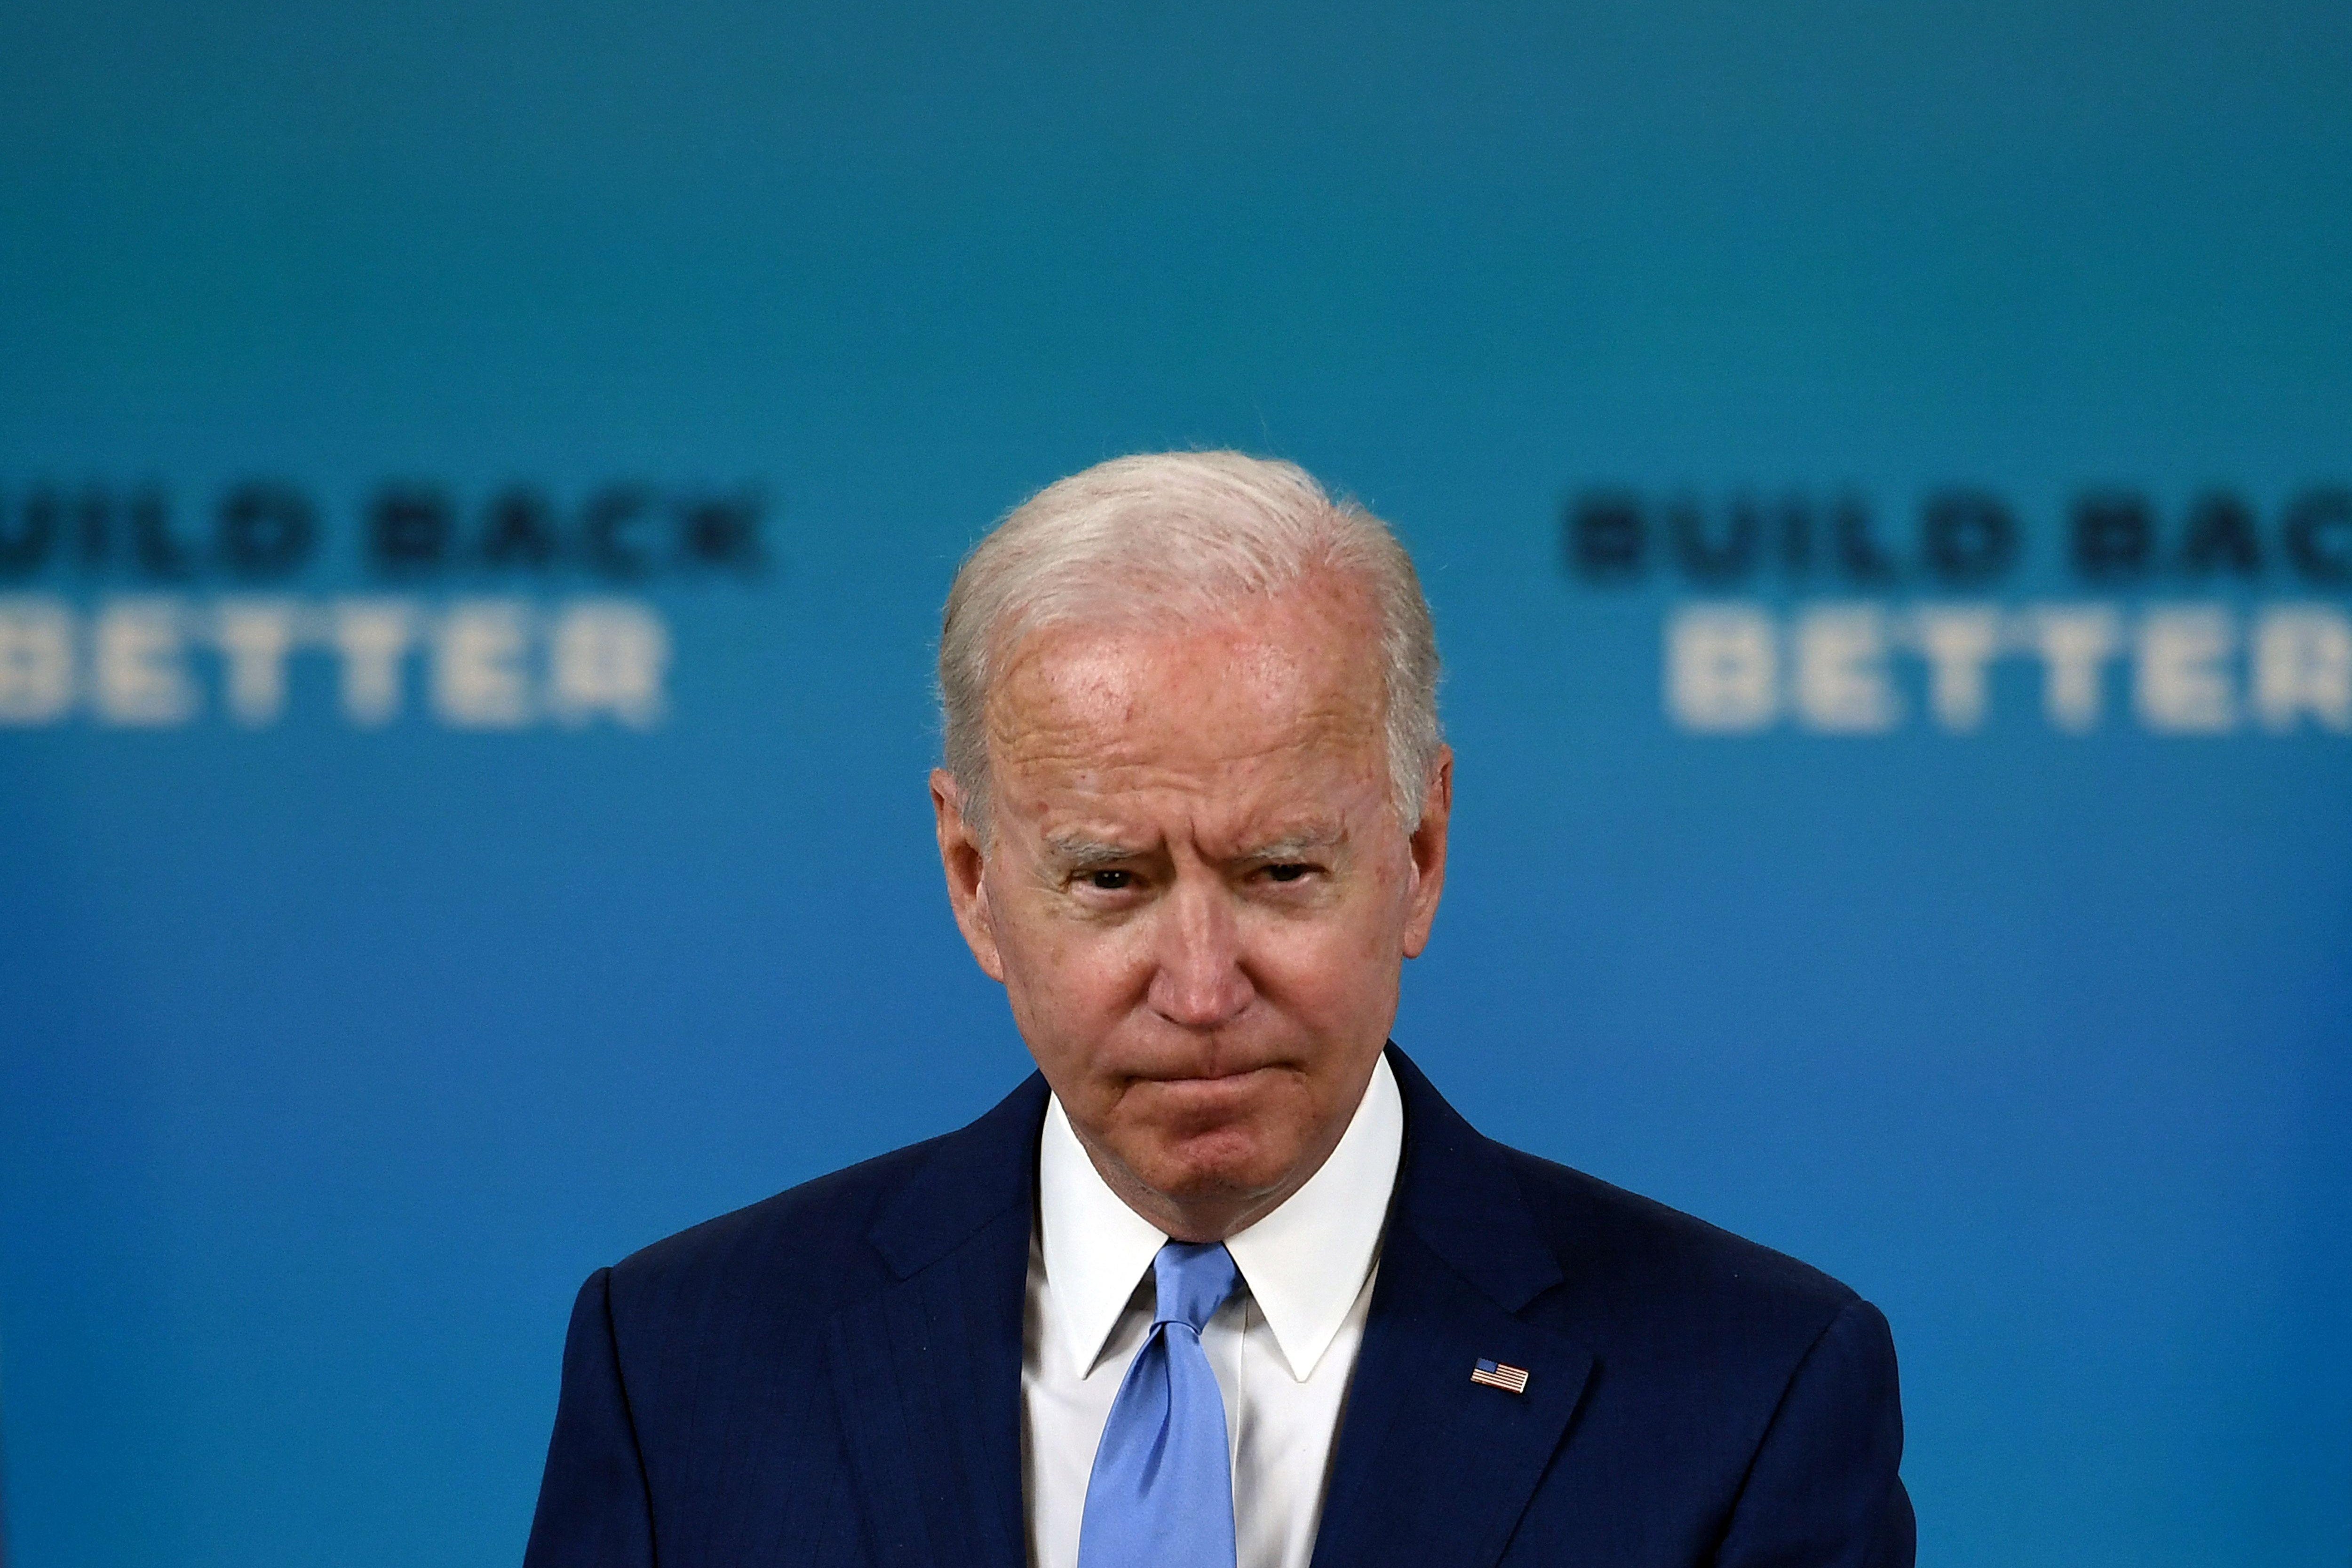 What President Biden’s Dismal Poll Numbers Really Mean David Plotz, Emily Bazelon, and John Dickerson